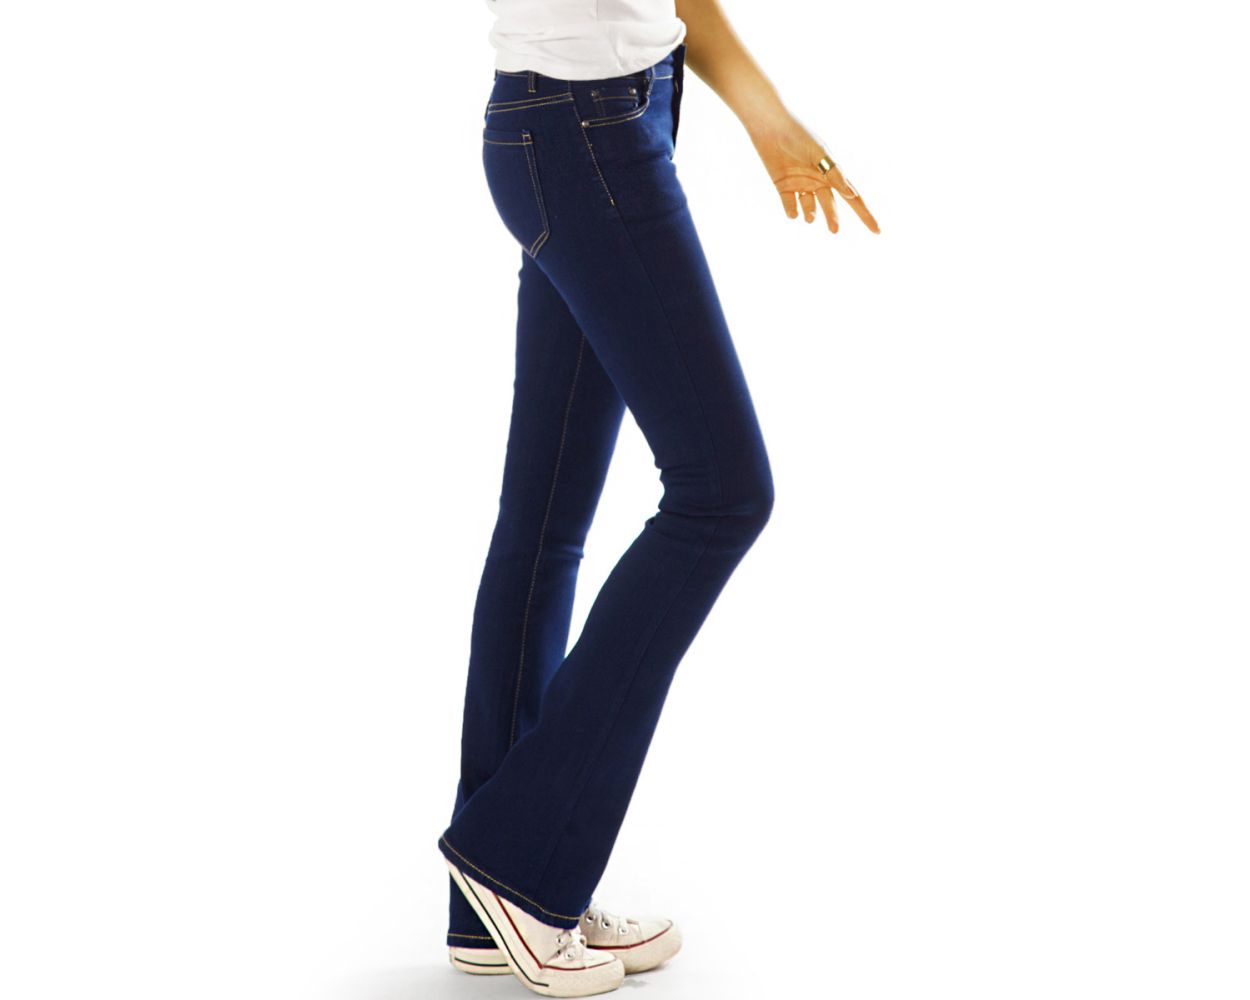 BE STYLED - Hüftjeans Bootcut Jeanshose - Low Waist Stretchjeans